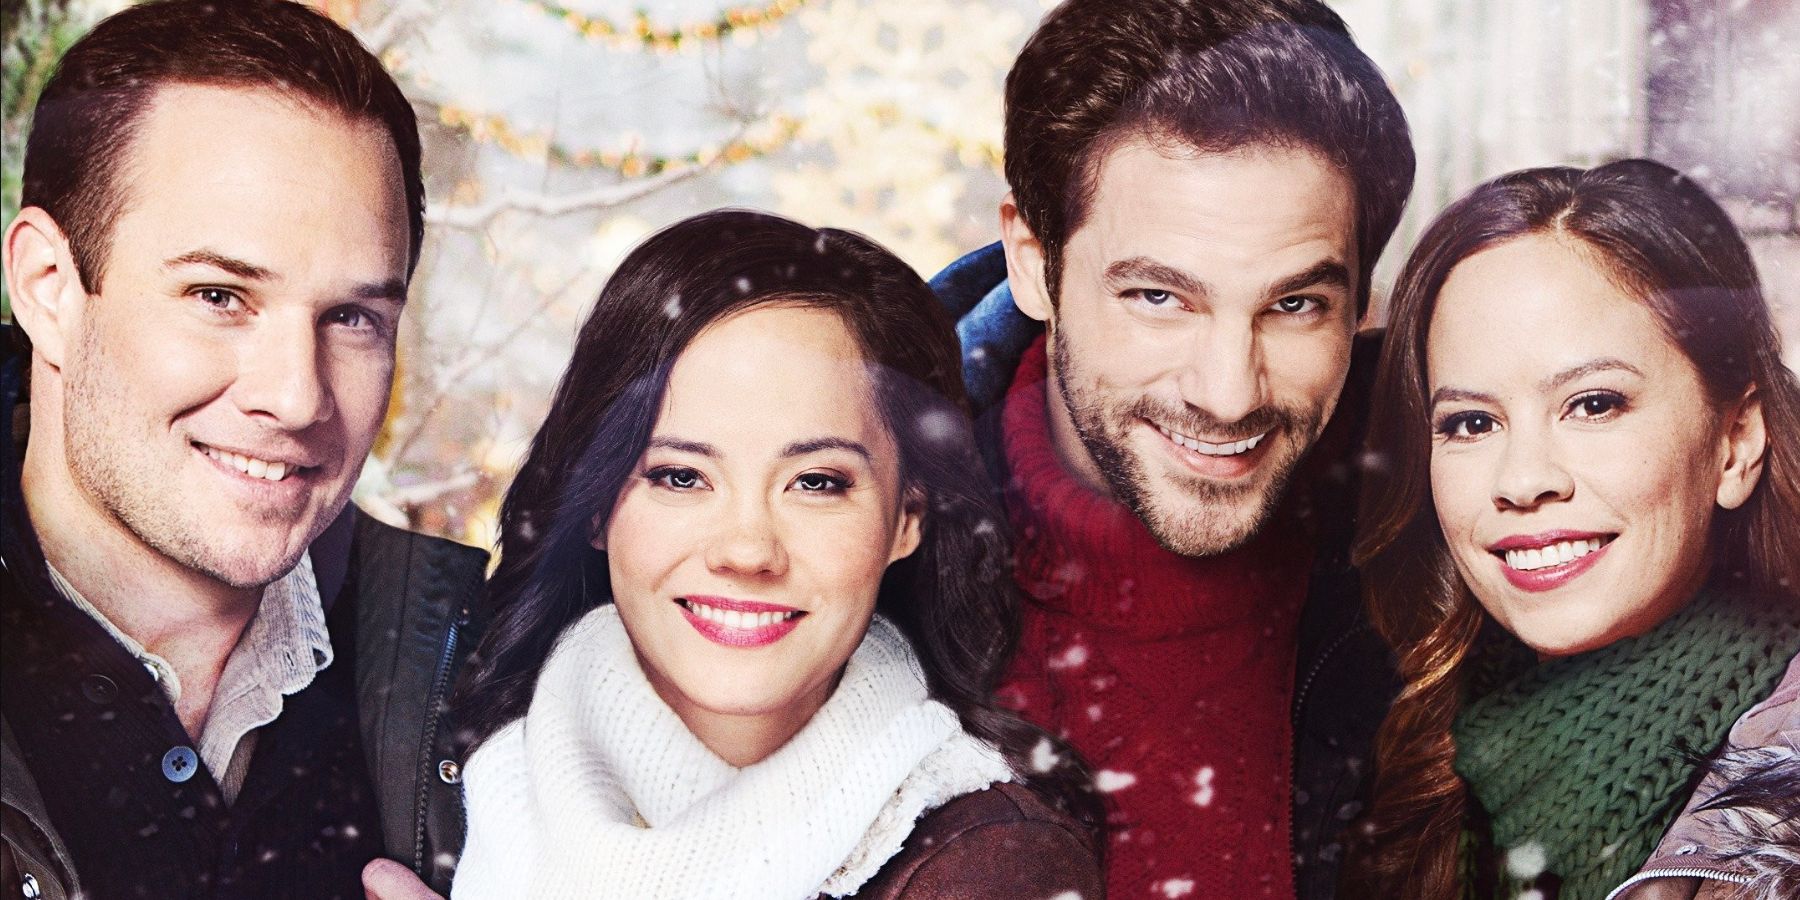 The four lead characters smiling for the camera in their winter clothes in A Christmas Movie Christmas